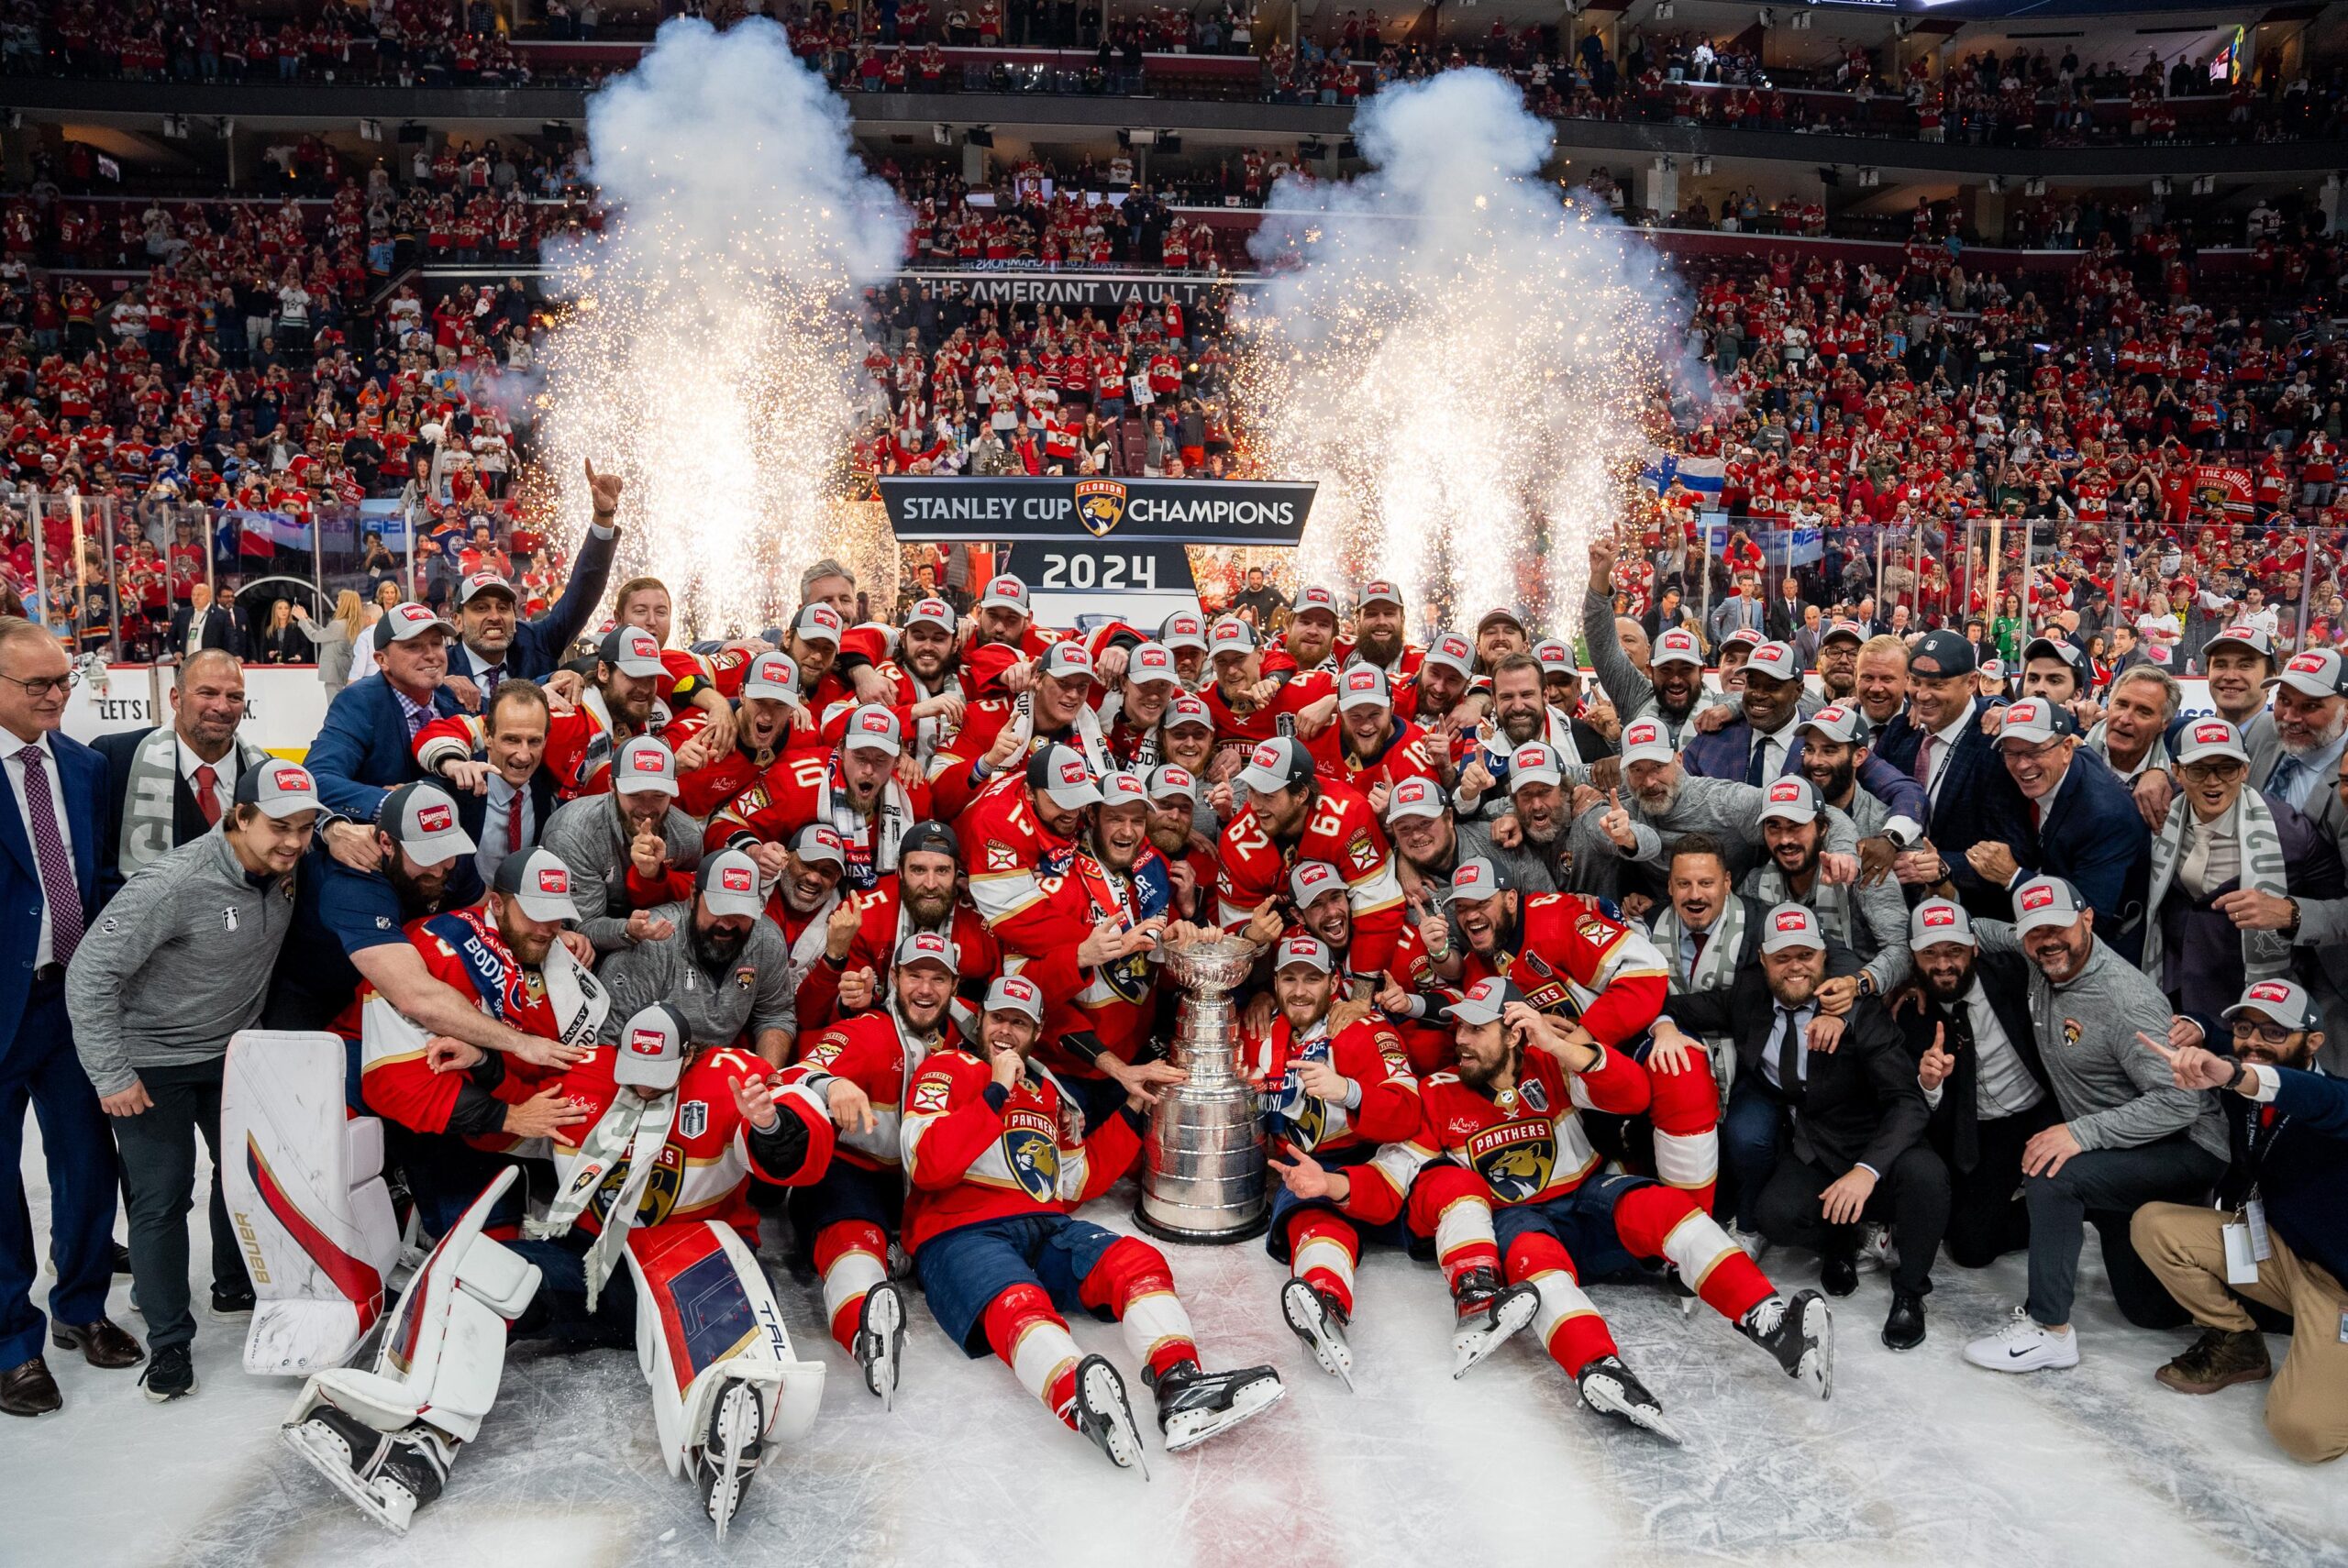 Florida Panthers Secure First Stanley Cup Title in Thrilling Game 7 Victory Over Edmonton Oilers